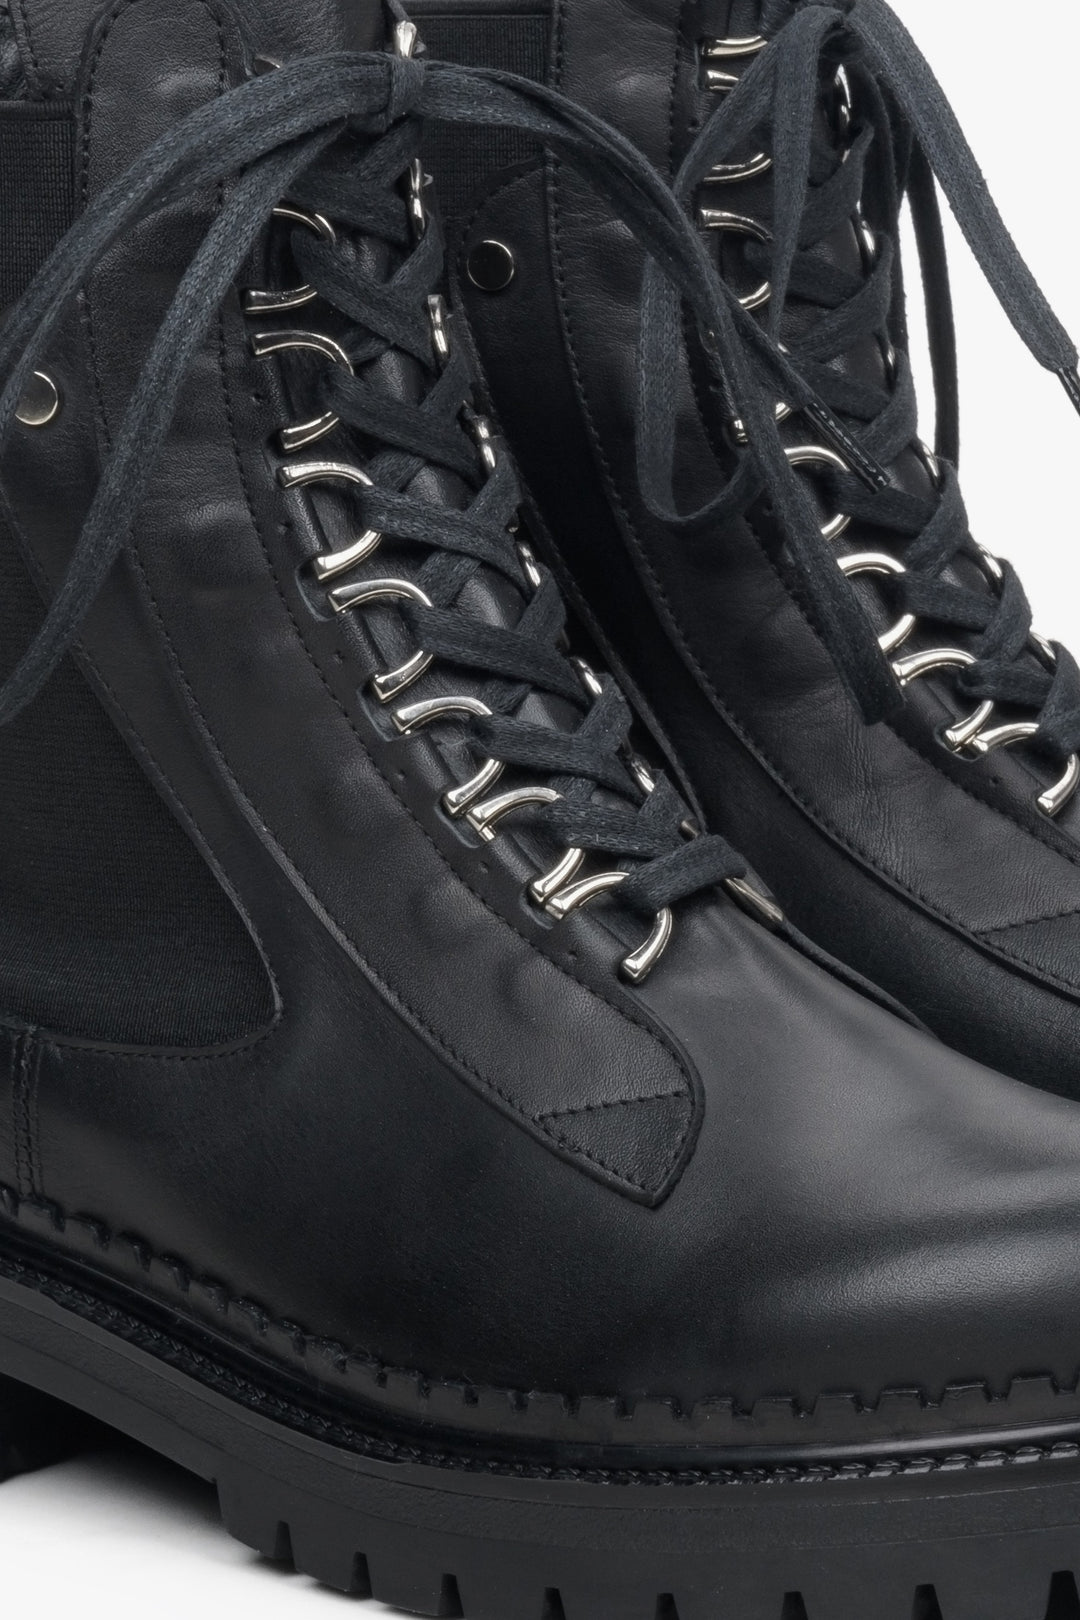 Women's lace-up ankle boots - a close-up on details.